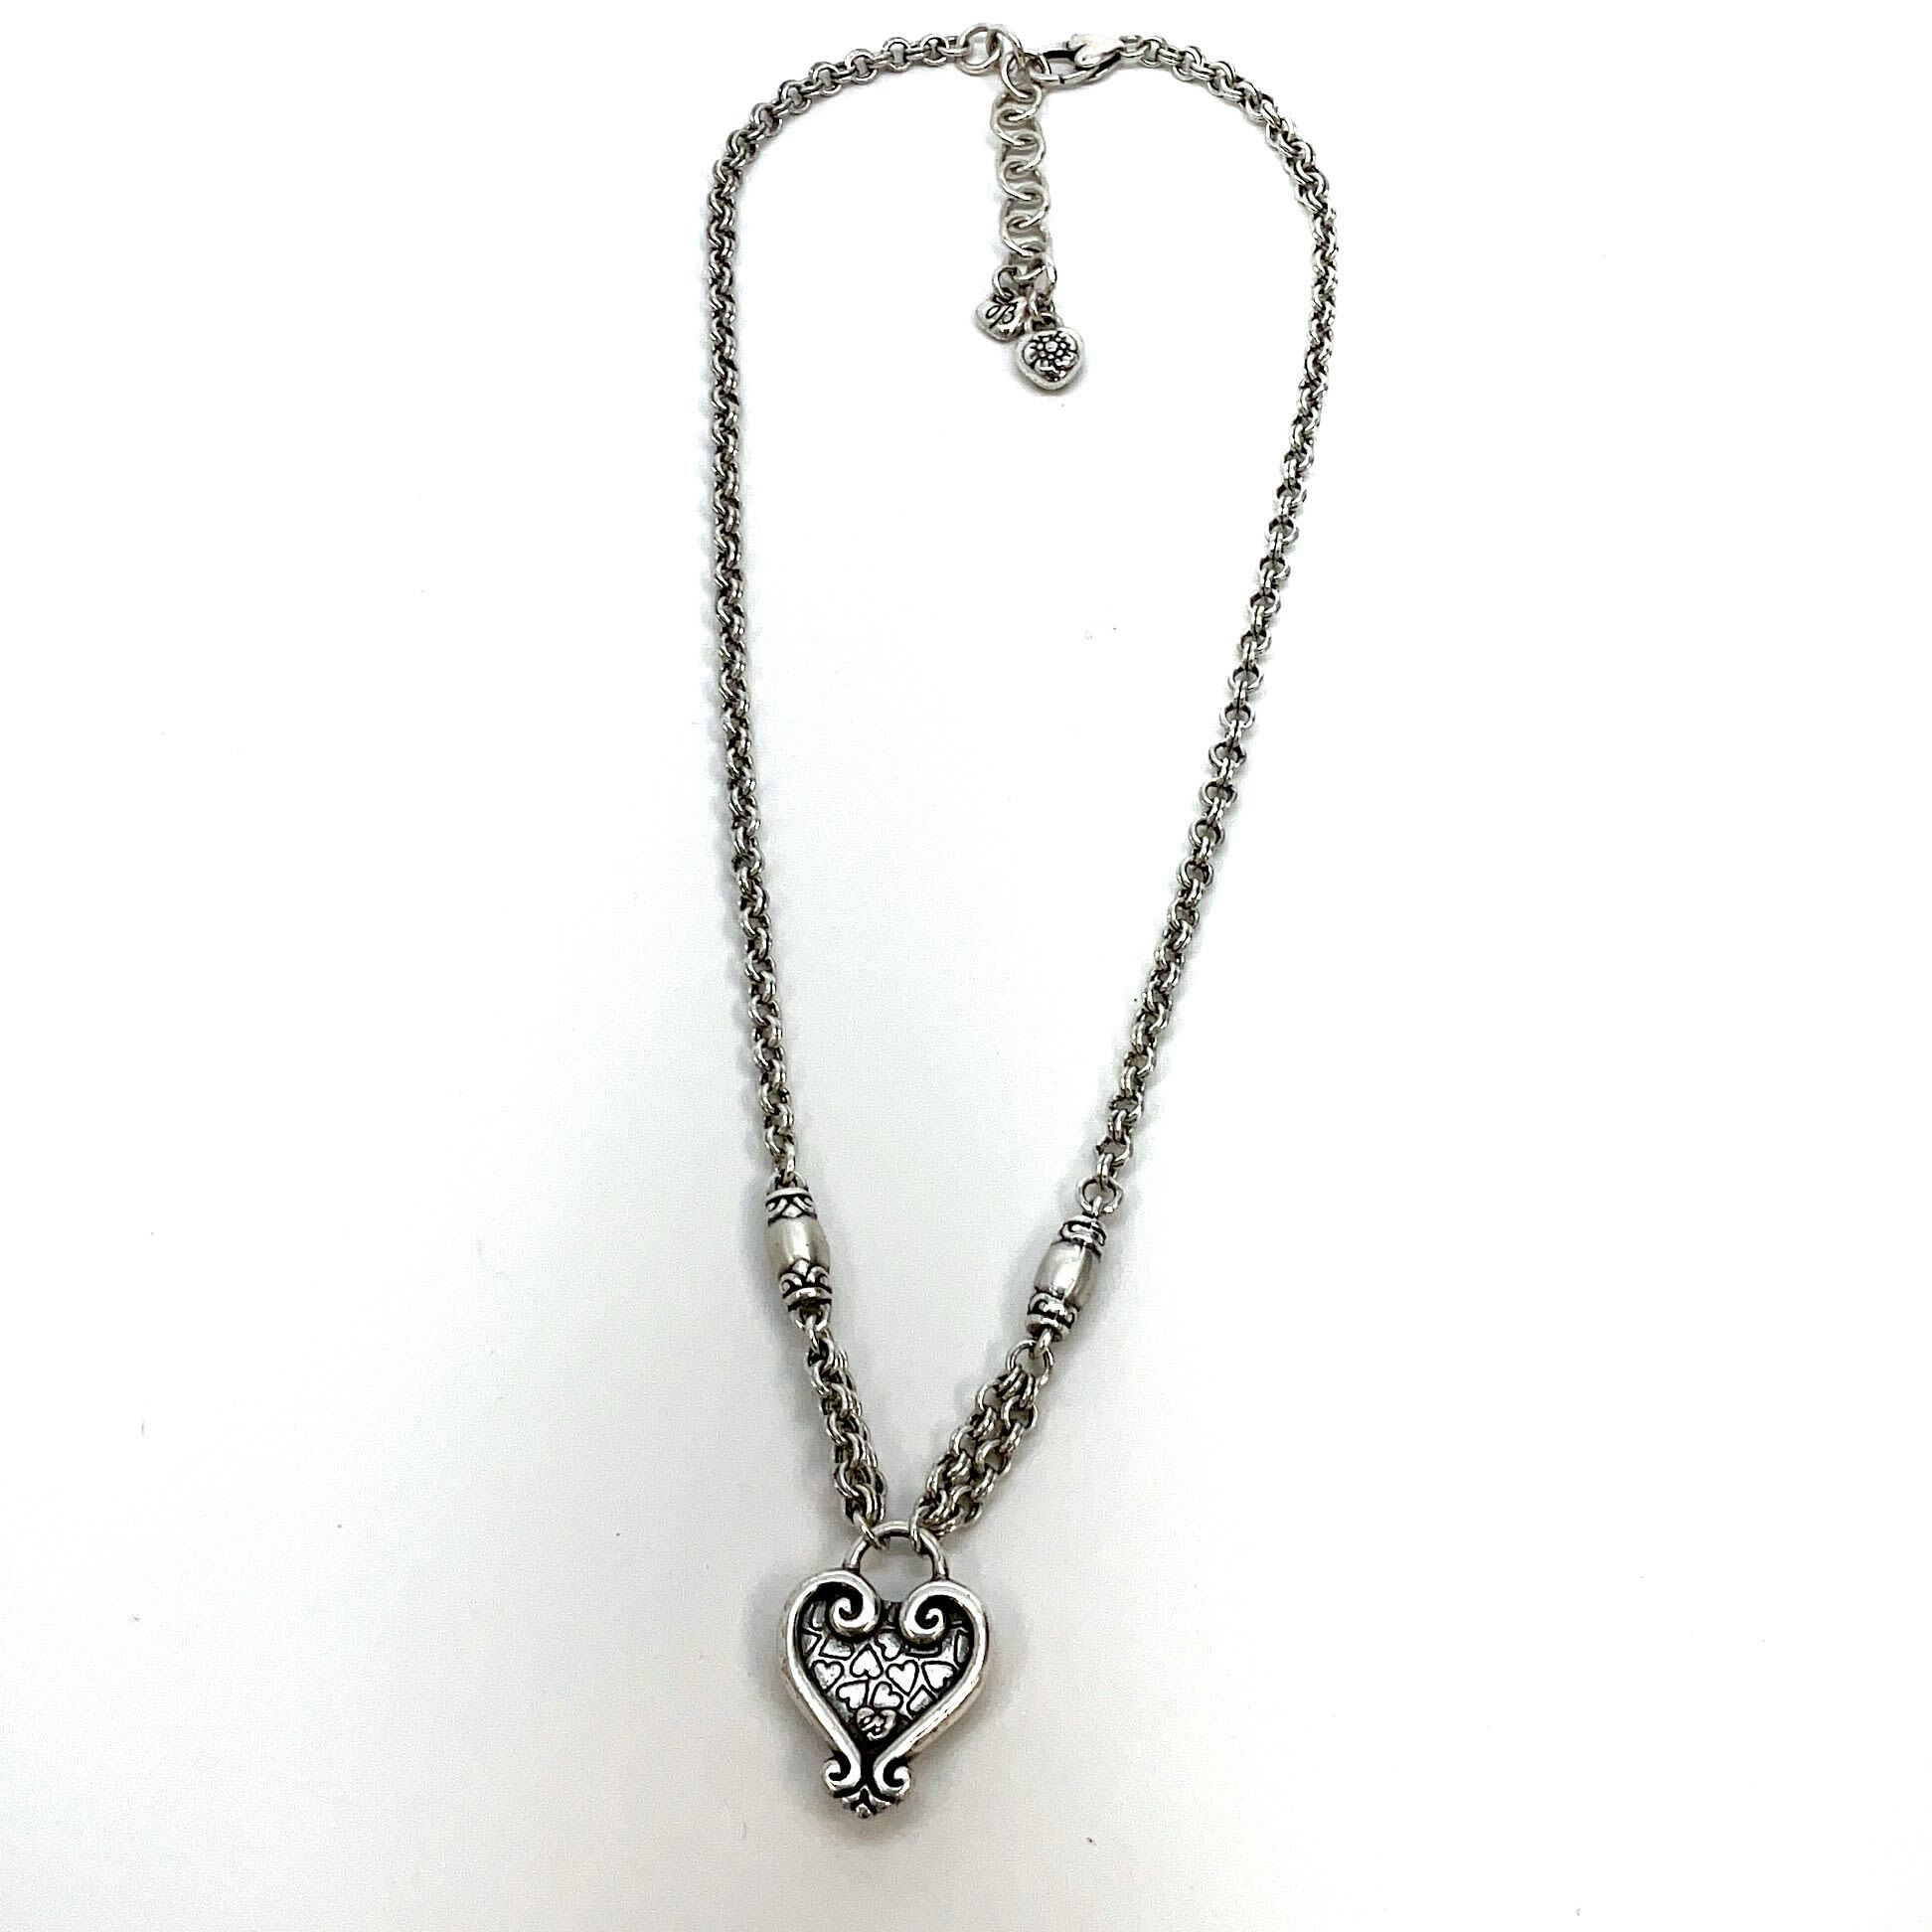 SHEIN ICON Silver Long Chain With Silver Heart Pendant | SHEIN USA